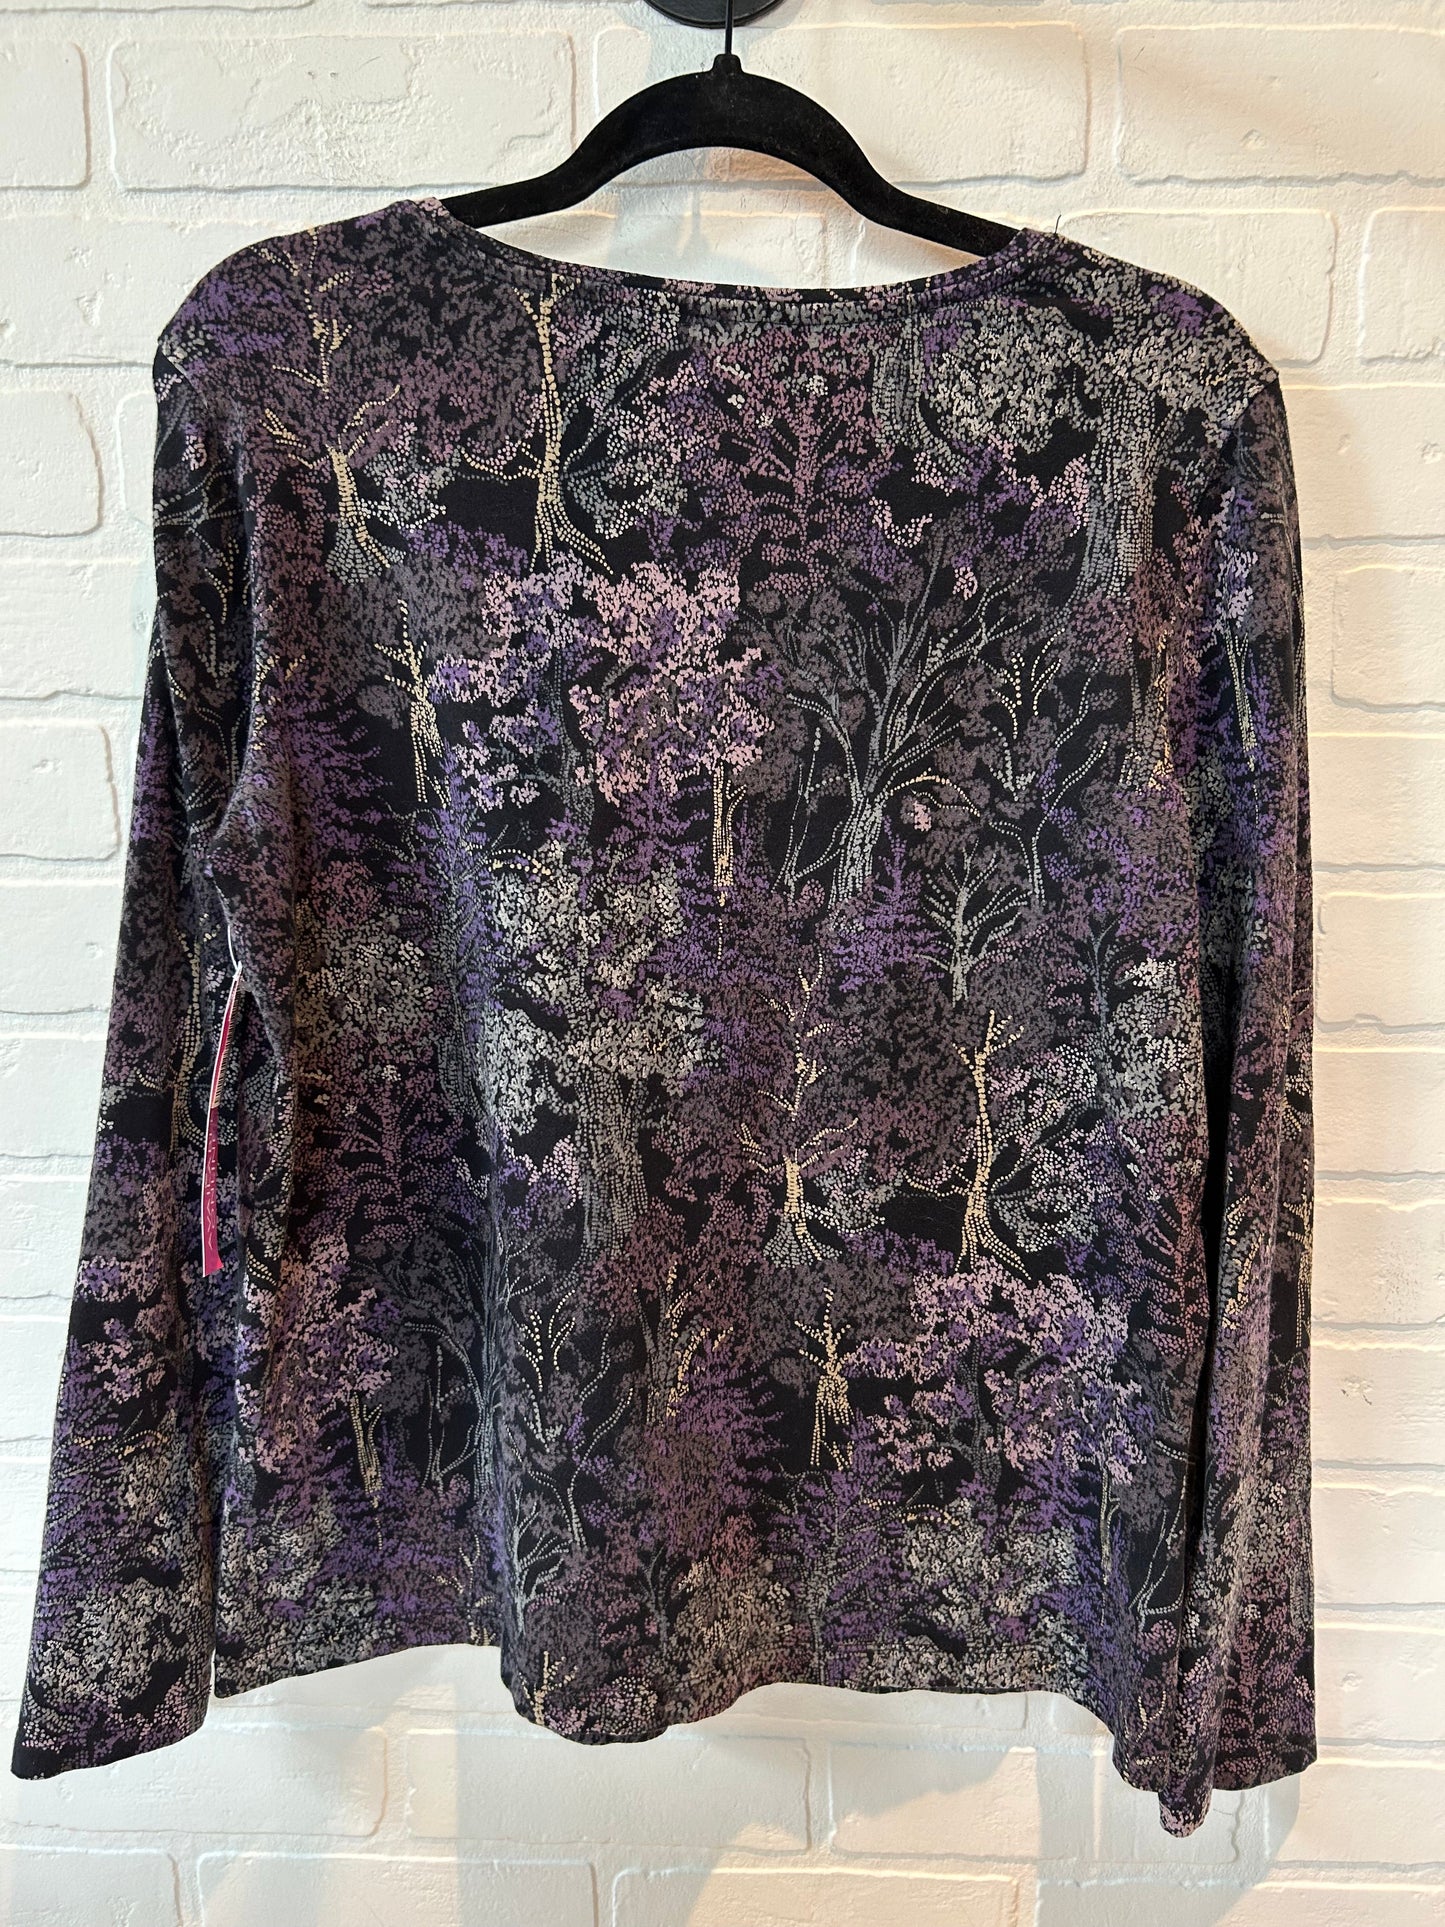 Black & Purple Top Long Sleeve Basic Christopher And Banks, Size L